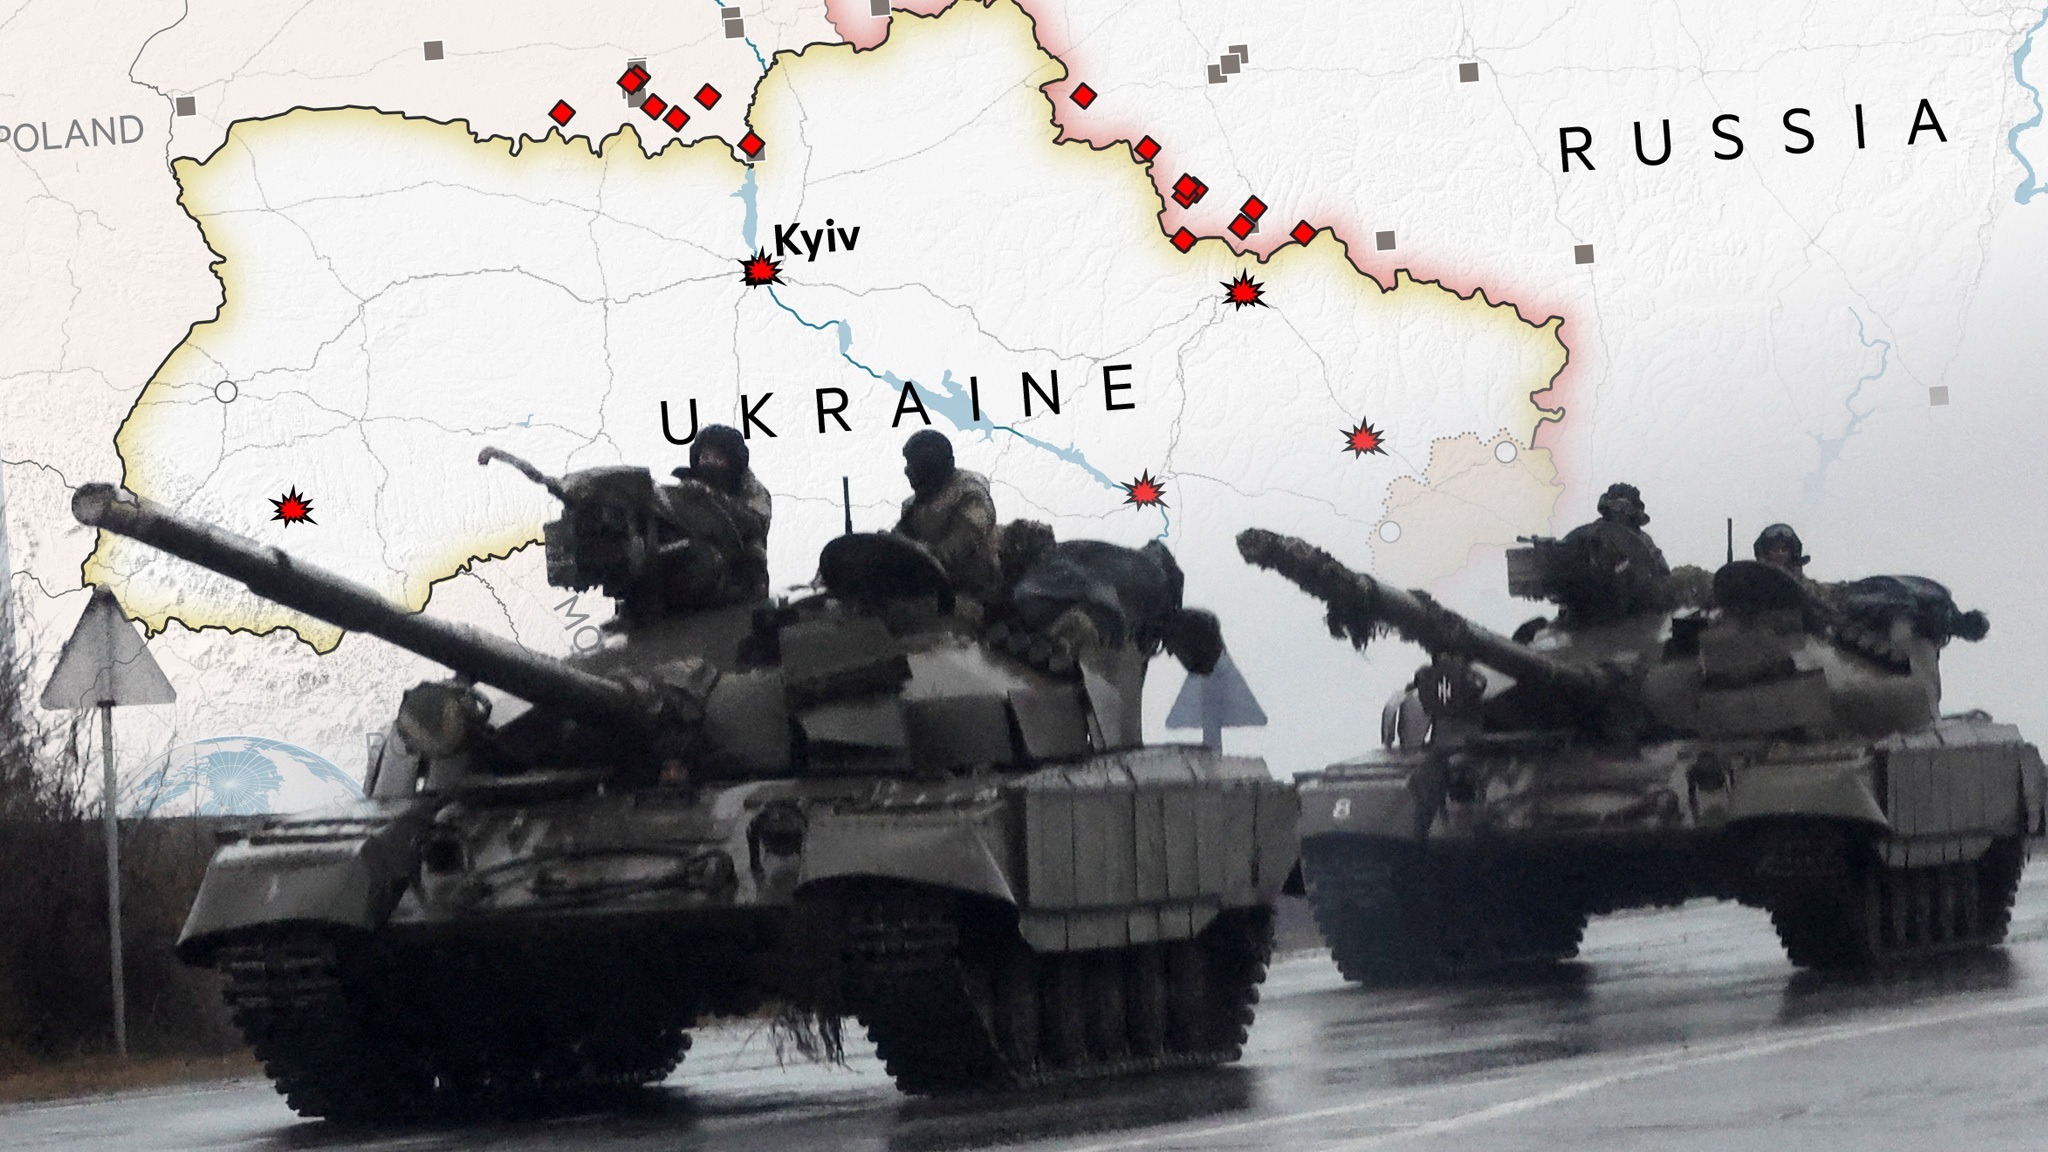 Ukraine's counteroffensive against Russia in maps — latest updates | Financial Times